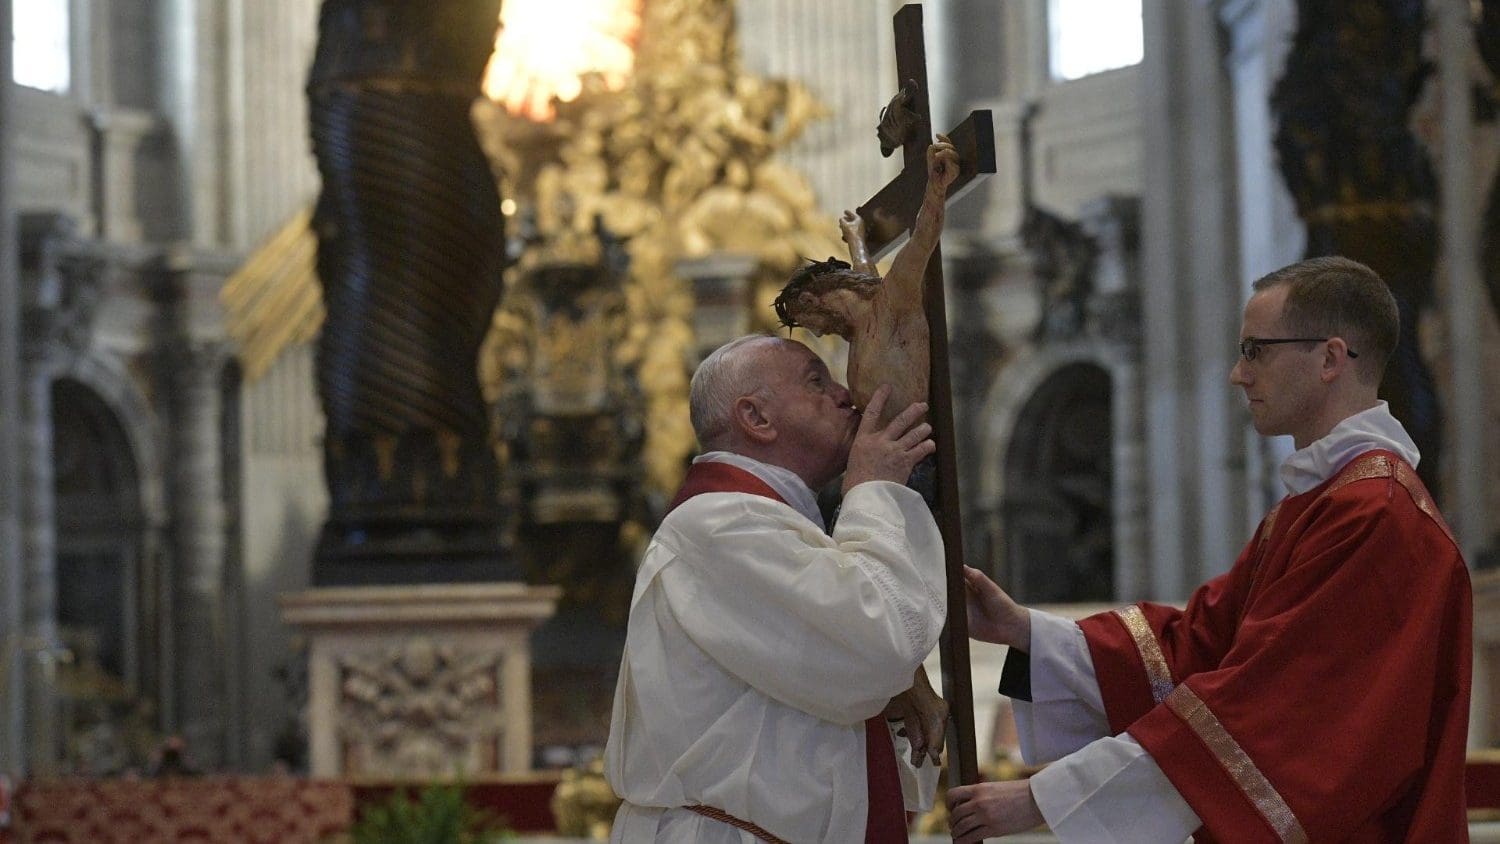 Should a Cross or Crucifix be used for veneration on Good Friday?